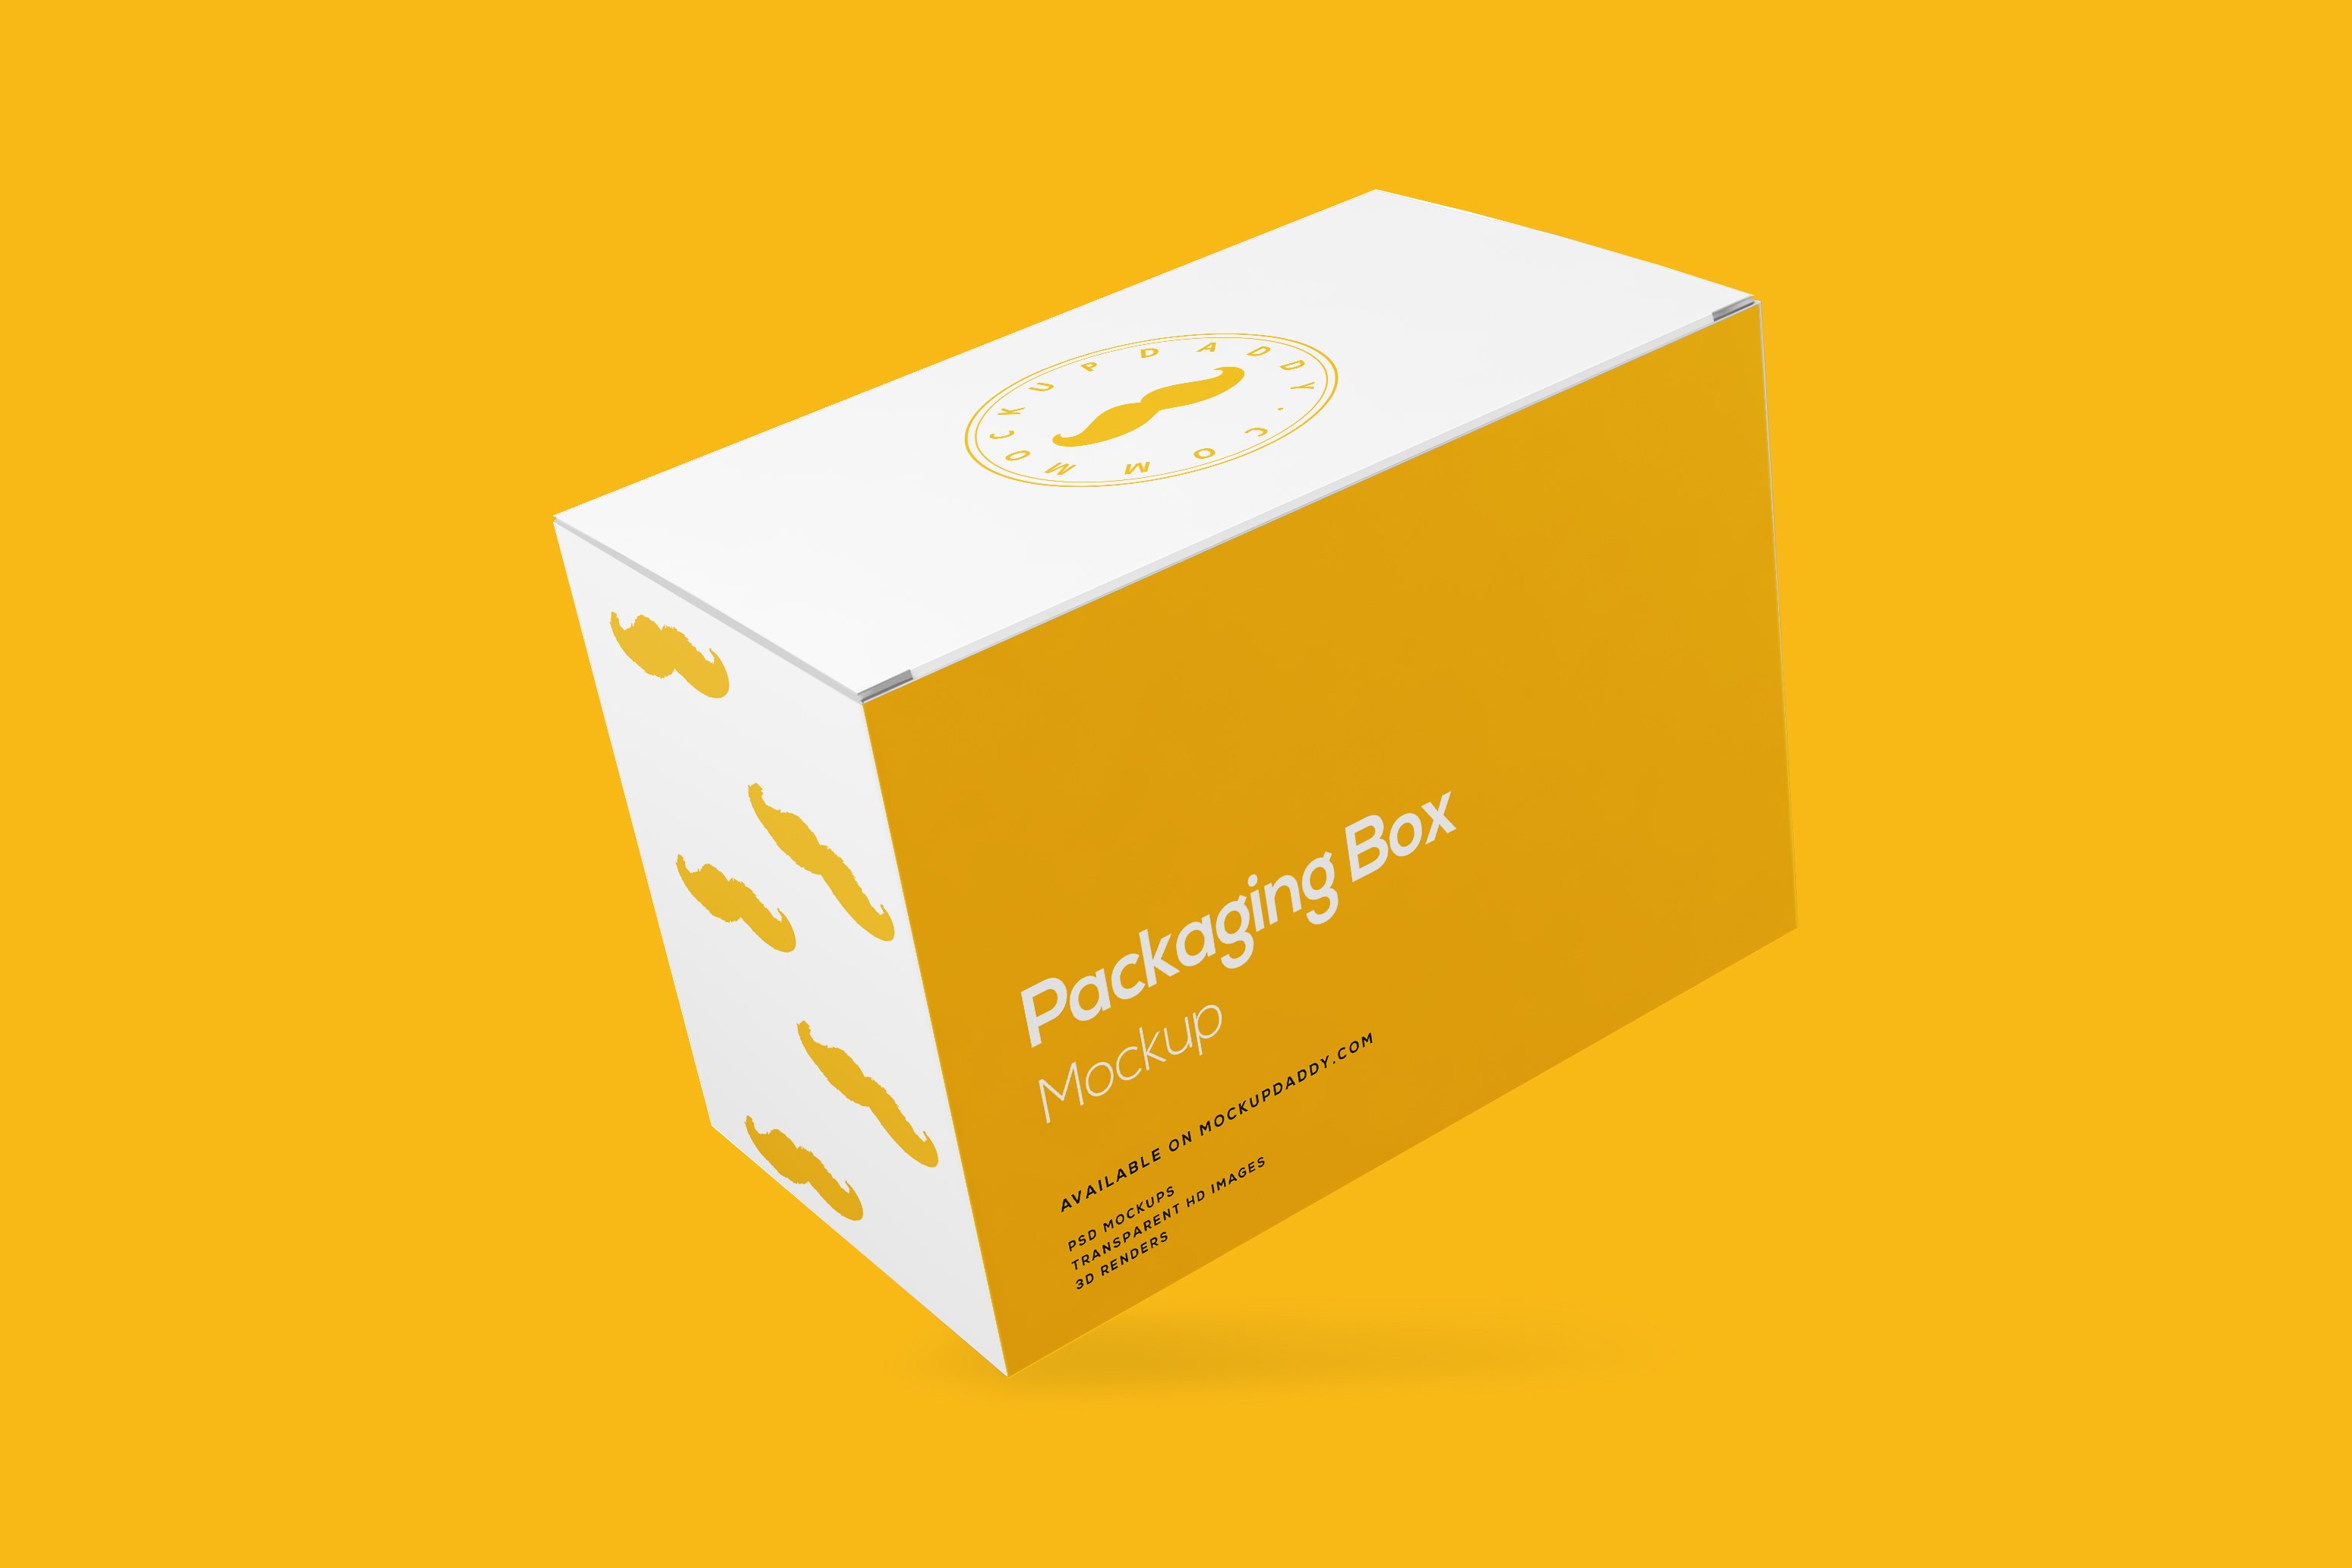 rectangle packaging box mockup floating 28129 679